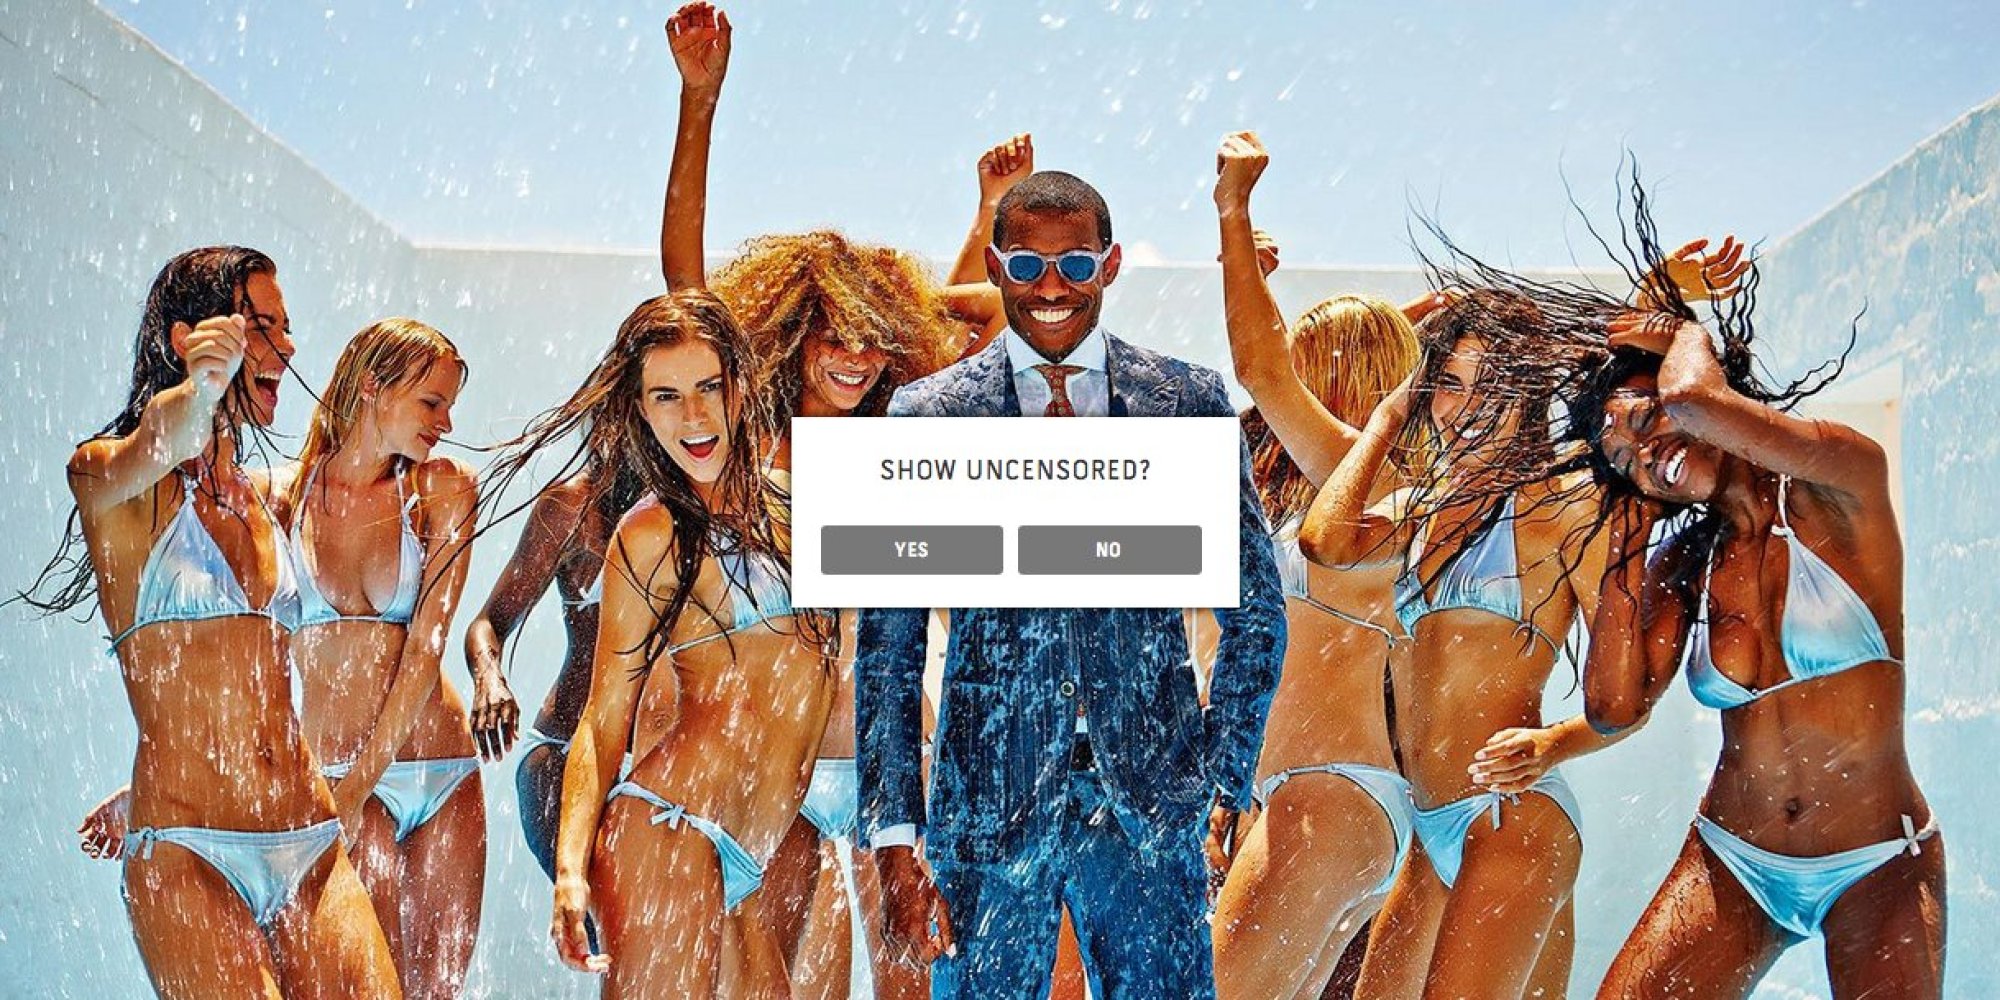 Suitsupply ad campaign with gay men provokes backlash 